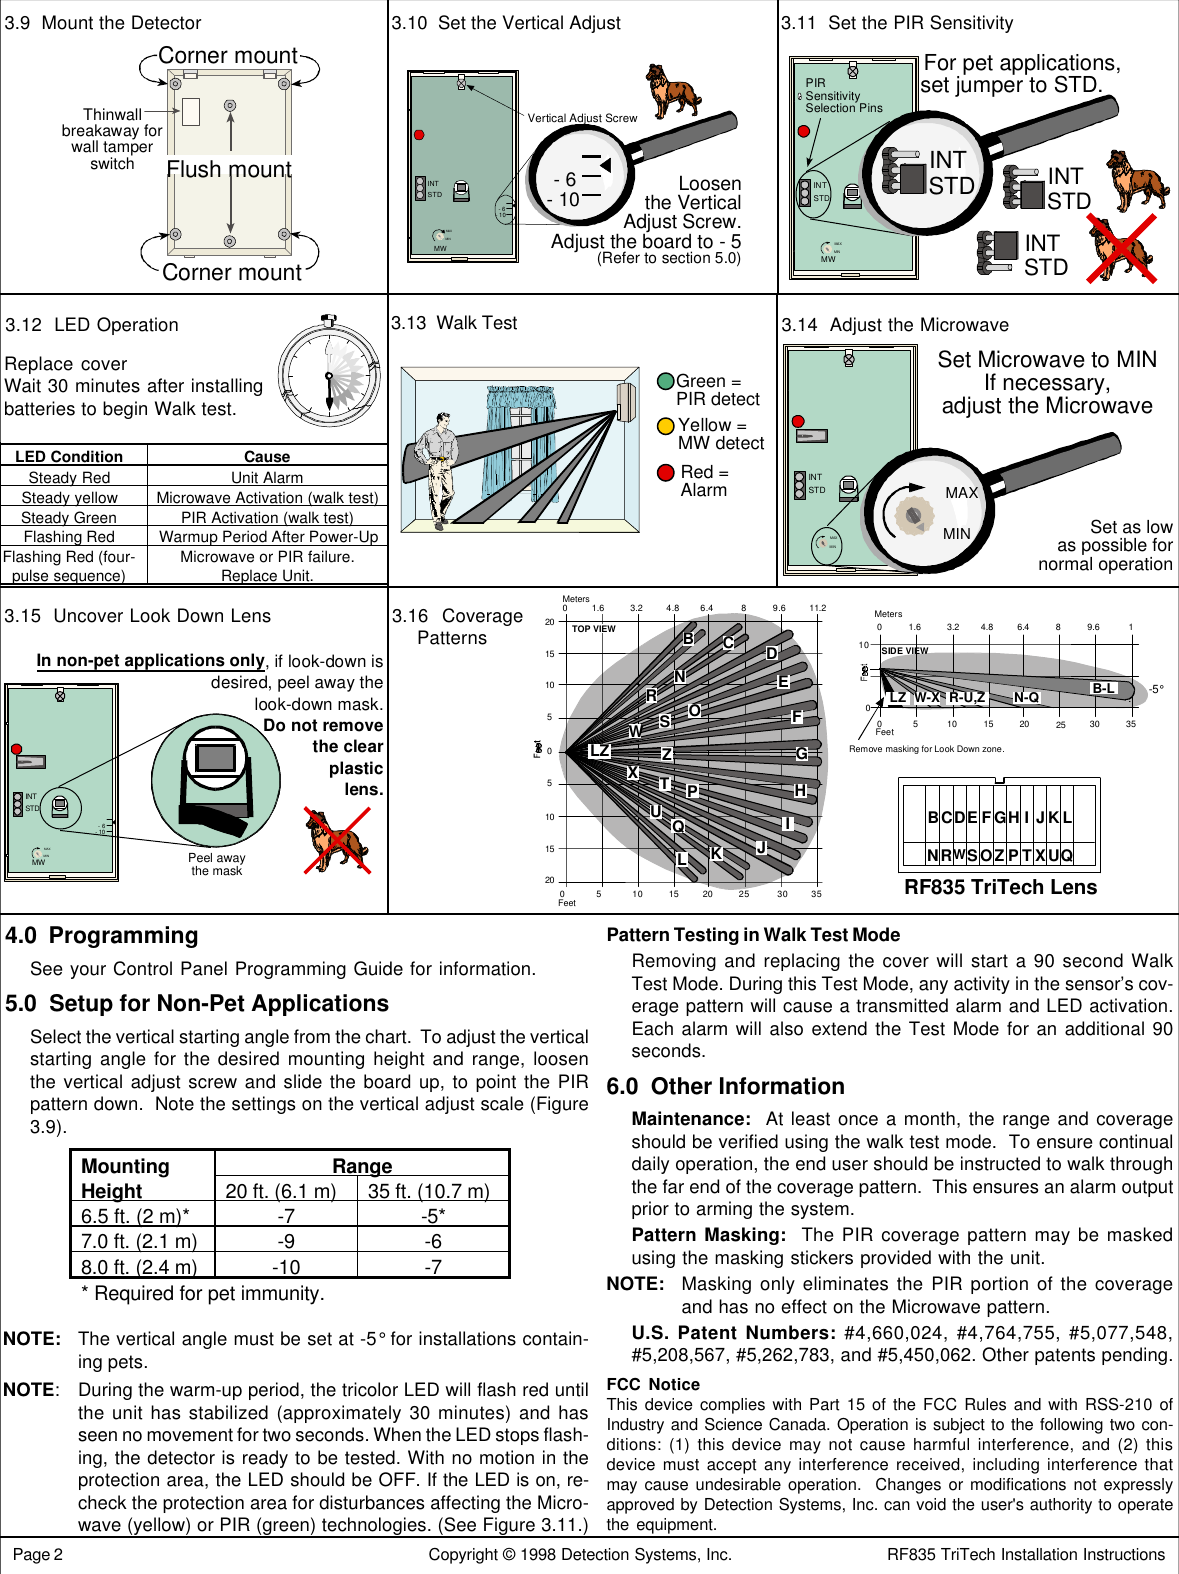  Page 2                                                                       Copyright © 1998 Detection Systems, Inc.                               RF835 TriTech Installation Instructions3.9  Mount the Detector 3.10  Set the Vertical Adjust 3.11  Set the PIR Sensitivity3.14  Adjust the Microwave3.16  CoveragePatternsFeet0 5 10 15 20 25 30 350510152051015200Meters1.6 3.2 4.8 6.4 8 9.6 11.2BCDEHIJKNOPQRSTUWXTOP VIEWLZFGLZ100Feet0 5 10 15 20 25 30-5°SIDE VIEW0Meters1.6 3.2 4.8 6.489.6351Remove masking for Look Down zone.B-LN-QR-U,ZW-XLZBCDEFGHIJKLNRWSOZPTXUQRF835 TriTech LensPattern Testing in Walk Test ModeRemoving and replacing the cover will start a 90 second WalkTest Mode. During this Test Mode, any activity in the sensor’s cov-erage pattern will cause a transmitted alarm and LED activation.Each alarm will also extend the Test Mode for an additional 90seconds.6.0  Other InformationMaintenance:  At least once a month, the range and coverageshould be verified using the walk test mode.  To ensure continualdaily operation, the end user should be instructed to walk throughthe far end of the coverage pattern.  This ensures an alarm outputprior to arming the system.Pattern Masking:  The PIR coverage pattern may be maskedusing the masking stickers provided with the unit.NOTE: Masking only eliminates the PIR portion of the coverageand has no effect on the Microwave pattern.U.S. Patent Numbers: #4,660,024, #4,764,755, #5,077,548,#5,208,567, #5,262,783, and #5,450,062. Other patents pending.FCC NoticeThis device complies with Part 15 of the FCC Rules and with RSS-210 ofIndustry and Science Canada. Operation is subject to the following two con-ditions: (1) this device may not cause harmful interference, and (2) thisdevice must accept any interference received, including interference thatmay cause undesirable operation.  Changes or modifications not expresslyapproved by Detection Systems, Inc. can void the user&apos;s authority to operatethe equipment.Mounting RangeHeight 20 ft. (6.1 m) 35 ft. (10.7 m)6.5 ft. (2 m)* -7 -5*7.0 ft. (2.1 m) -9 -68.0 ft. (2.4 m) -10 -7* Required for pet immunity.4.0  ProgrammingSee your Control Panel Programming Guide for information.5.0  Setup for Non-Pet ApplicationsSelect the vertical starting angle from the chart.  To adjust the verticalstarting angle for the desired mounting height and range, loosenthe vertical adjust screw and slide the board up, to point the PIRpattern down.  Note the settings on the vertical adjust scale (Figure3.9).NOTE: The vertical angle must be set at -5° for installations contain-ing pets.NOTE:During the warm-up period, the tricolor LED will flash red untilthe unit has stabilized (approximately 30 minutes) and hasseen no movement for two seconds. When the LED stops flash-ing, the detector is ready to be tested. With no motion in theprotection area, the LED should be OFF. If the LED is on, re-check the protection area for disturbances affecting the Micro-wave (yellow) or PIR (green) technologies. (See Figure 3.11.)3.15  Uncover Look Down Lens3.12  LED OperationLED Condition CauseSteady Red Unit AlarmSteady yellow Microwave Activation (walk test)Steady Green PIR Activation (walk test)Flashing Red Warmup Period After Power-UpFlashing Red (four-pulse sequence) Microwave or PIR failure.Replace Unit.3.13  Walk TestGreen =PIR detectYellow =MW detectRed =AlarmReplace coverWait 30 minutes after installingbatteries to begin Walk test.INTSTD- 6- 10MWMINMAXPIRSensitivitySelection PinsFor pet applications,set jumper to STD.INTSTDINTSTDINTSTDINTSTD- 6- 10MWMINMAX Peel awaythe maskIn non-pet applications only, if look-down isdesired, peel away thelook-down mask.Do not removethe clearplasticlens.INTSTDMINMAX MINMAXSet Microwave to MINIf necessary,adjust the MicrowaveSet as lowas possible fornormal operationLoosenthe VerticalAdjust Screw.Adjust the board to - 5(Refer to section 5.0)INTSTDVertical Adjust Screw- 6- 10- 6- 10MWMINMAXThinwallbreakaway forwall tamperswitchFlush mountCorner mountCorner mount